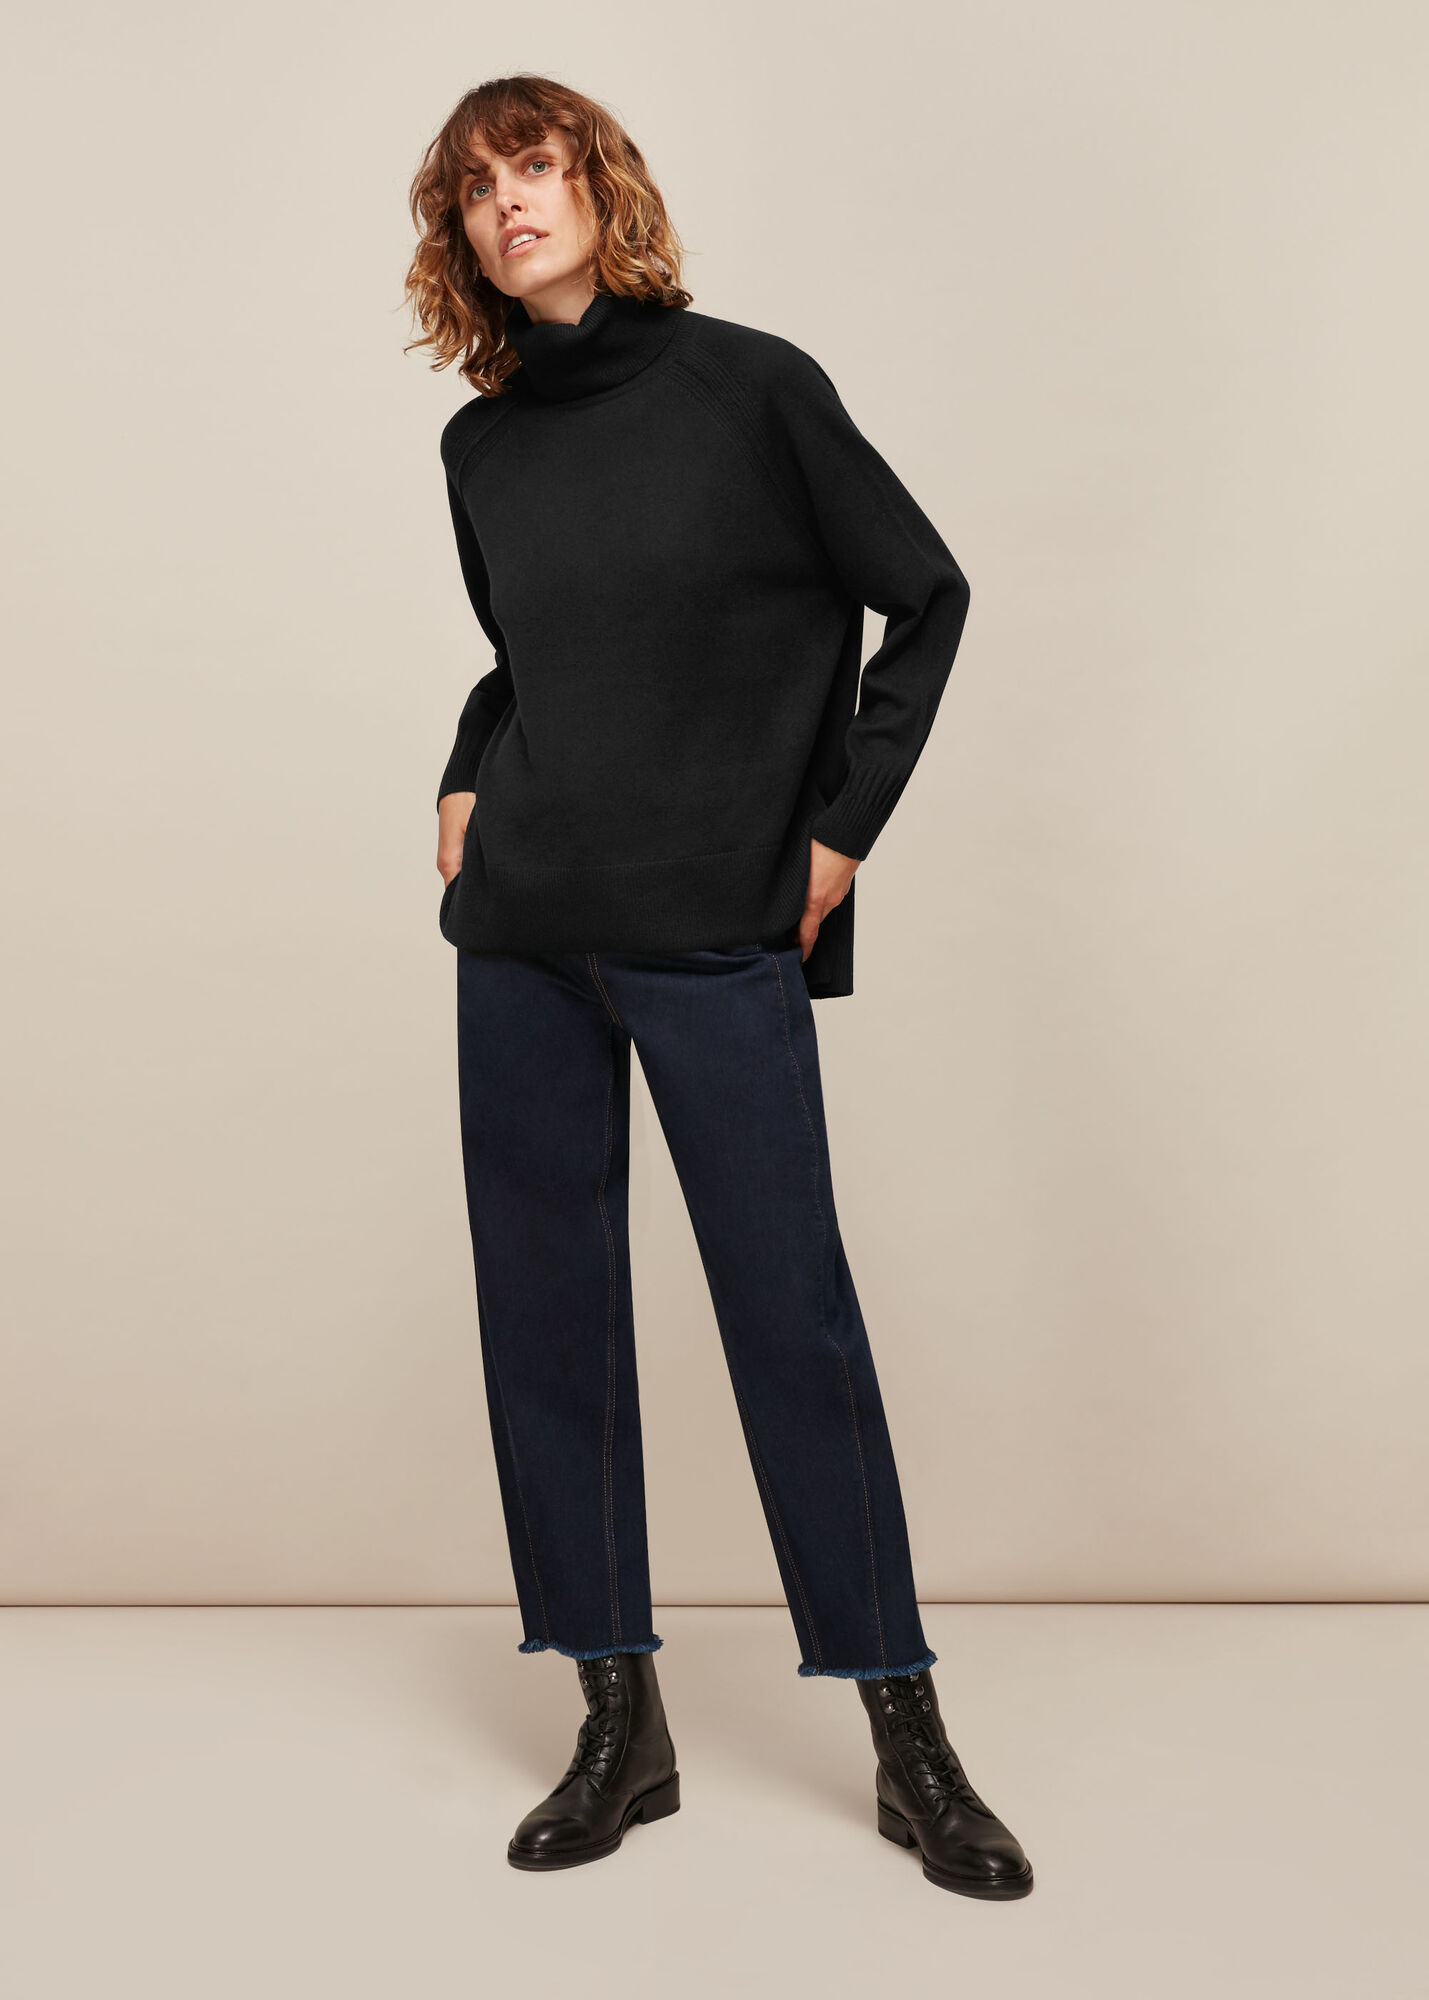 Black Cashmere Roll Neck Sweater | WHISTLES